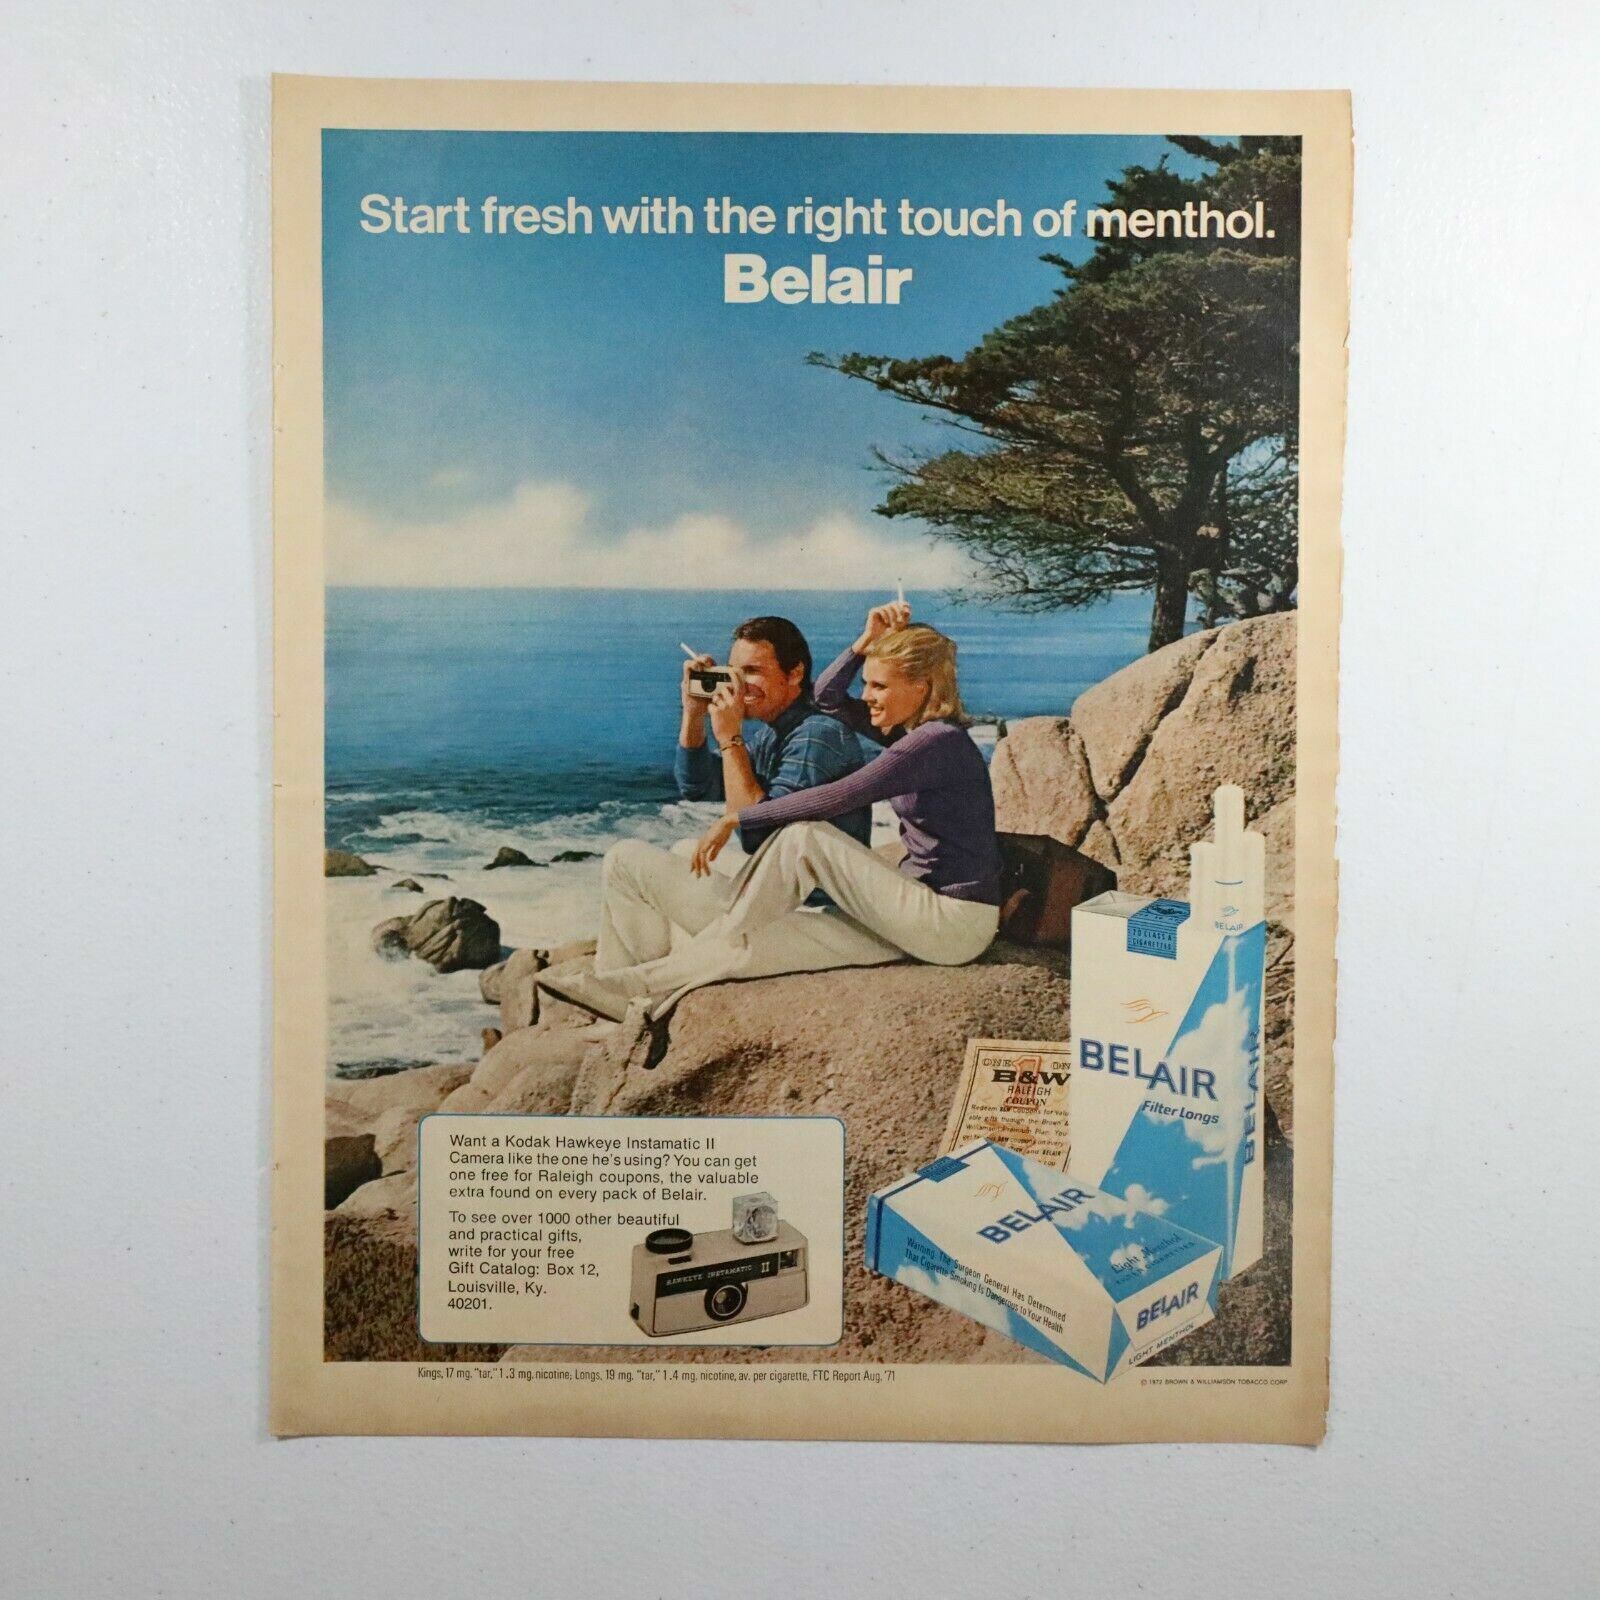 Vtg Belair Cigarettes Start Fresh with the Right Touch of Menthol Kodak Print Ad